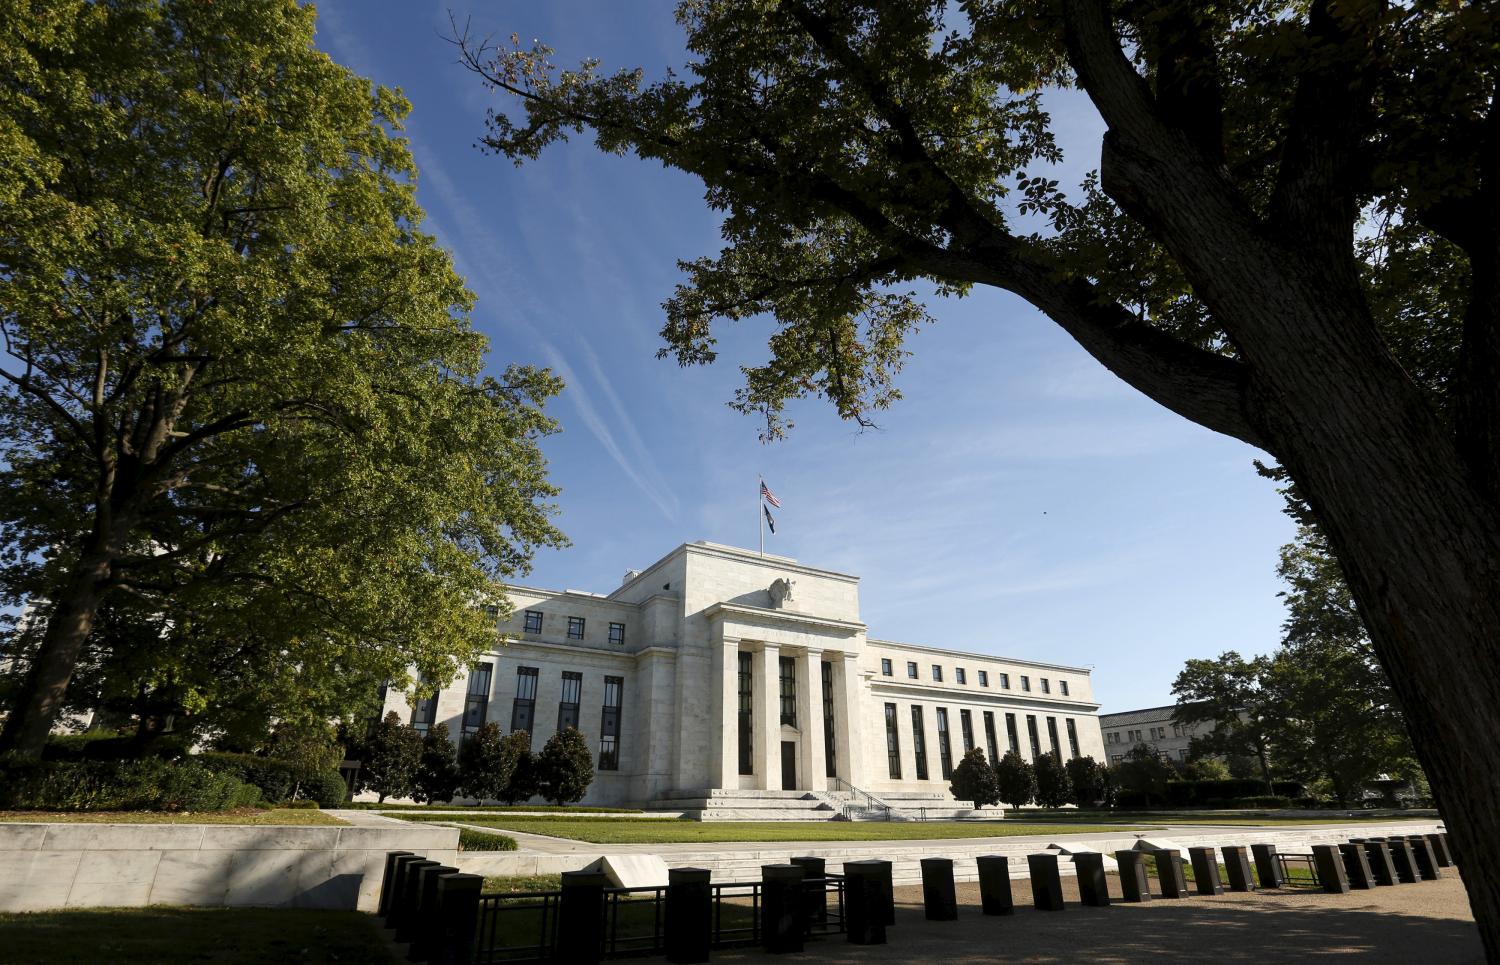 The Federal Reserve headquarters in Washington September 16 2015. The Federal Reserve, facing this week its biggest policy decision yet under Chair Janet Yellen, puts its credibility on the line regardless of whether it waits or raises interest rates for the first time in nearly a decade.       REUTERS/Kevin Lamarque  - GF10000208152